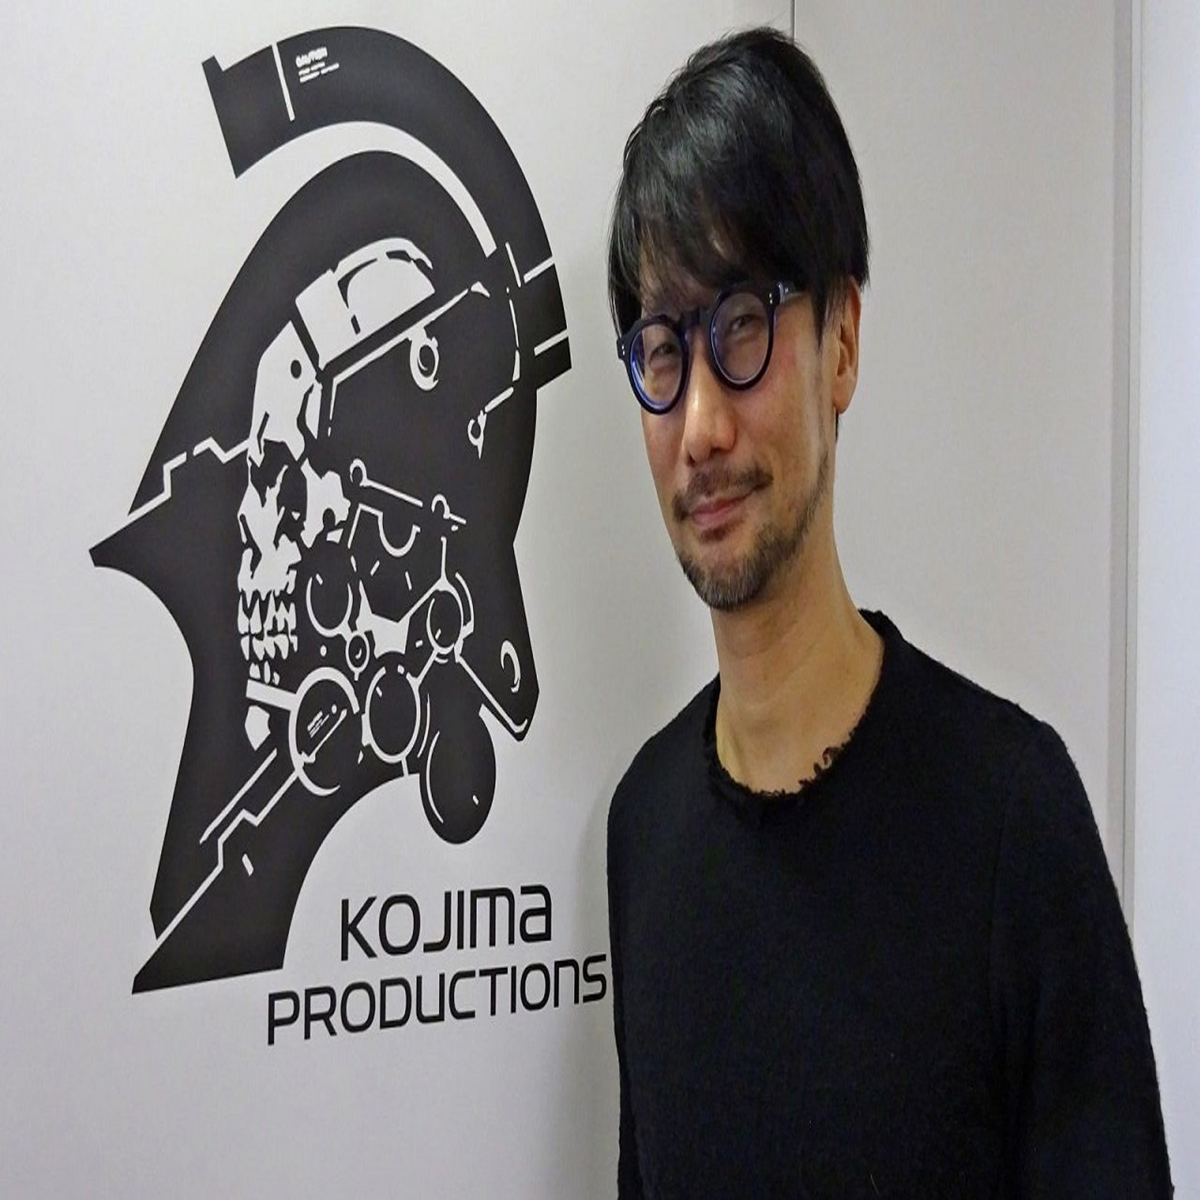 Hideo Kojima documentary Connecting Worlds gets official trailer